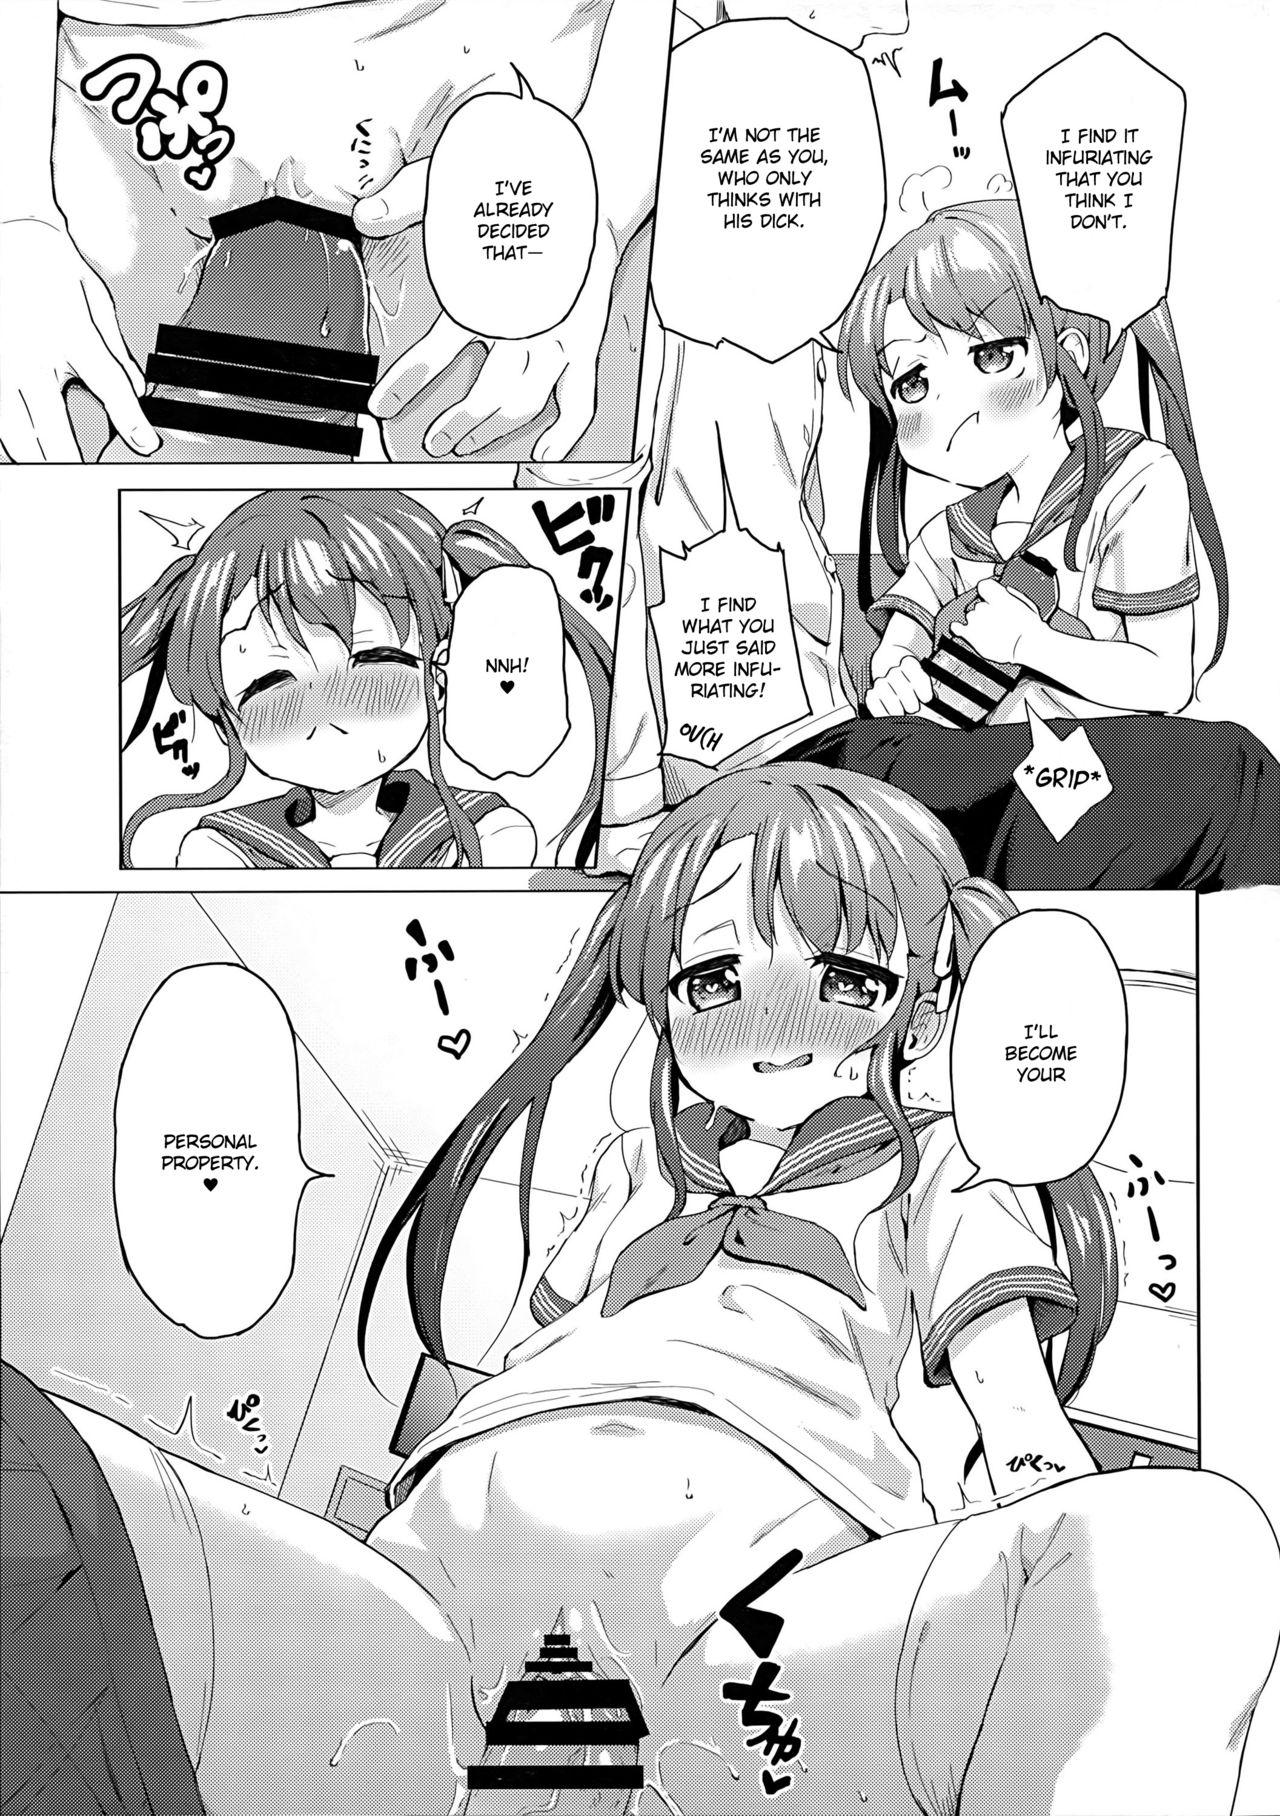 Gozando Imouto wa Ani Senyou | A Little Sister Is Exclusive Only for Her Big Brother - Original Sextoy - Page 8